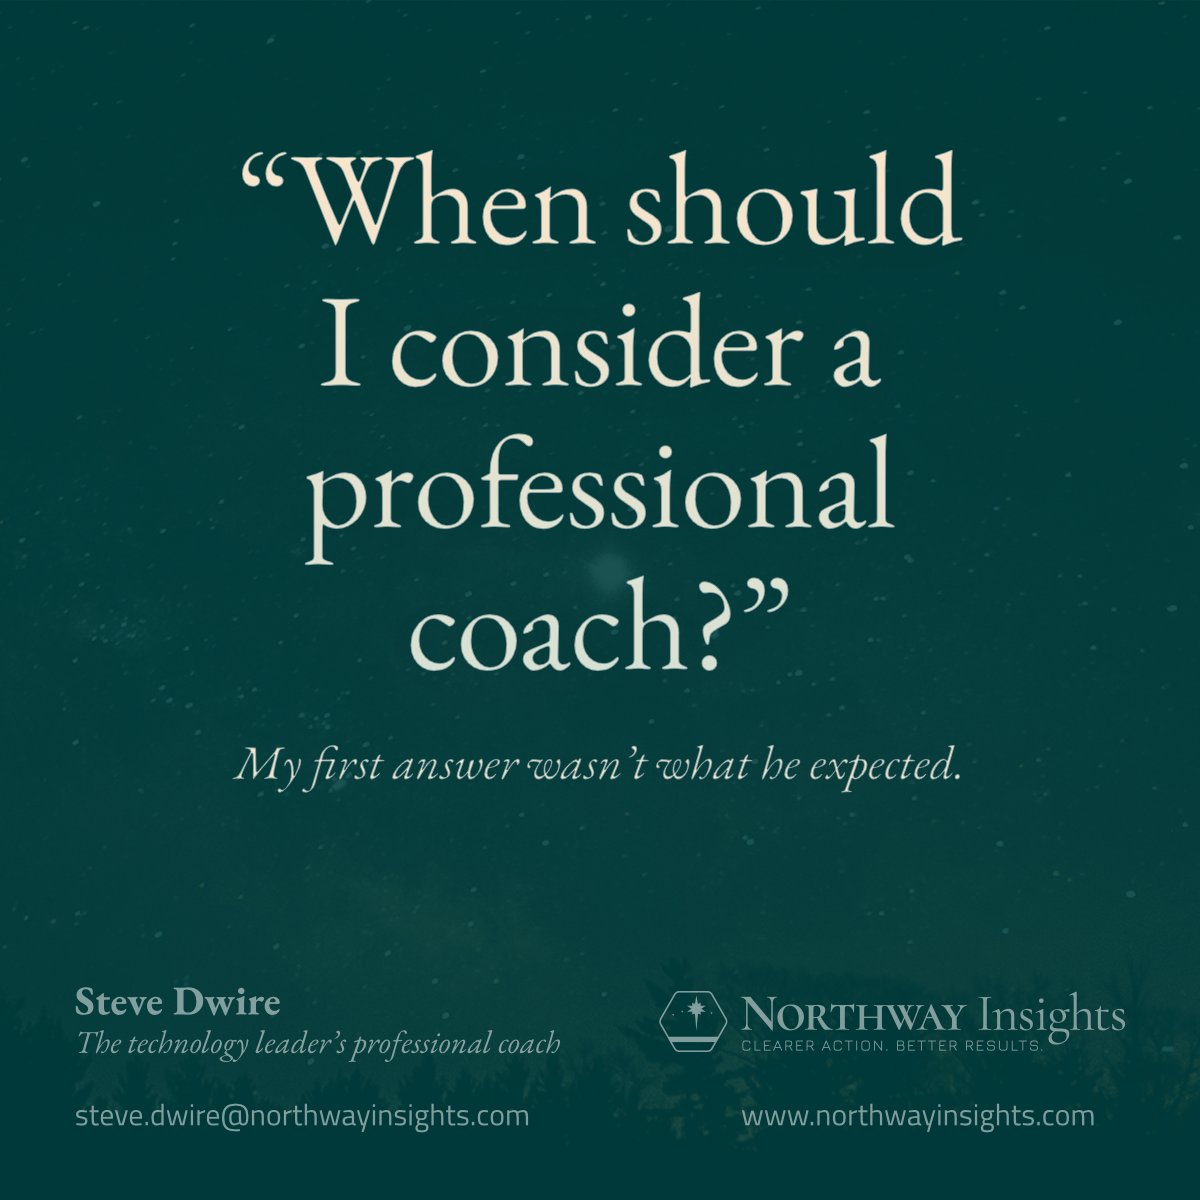 "When should I consider a professional coach?" (My first answer wasn't what he expected.)